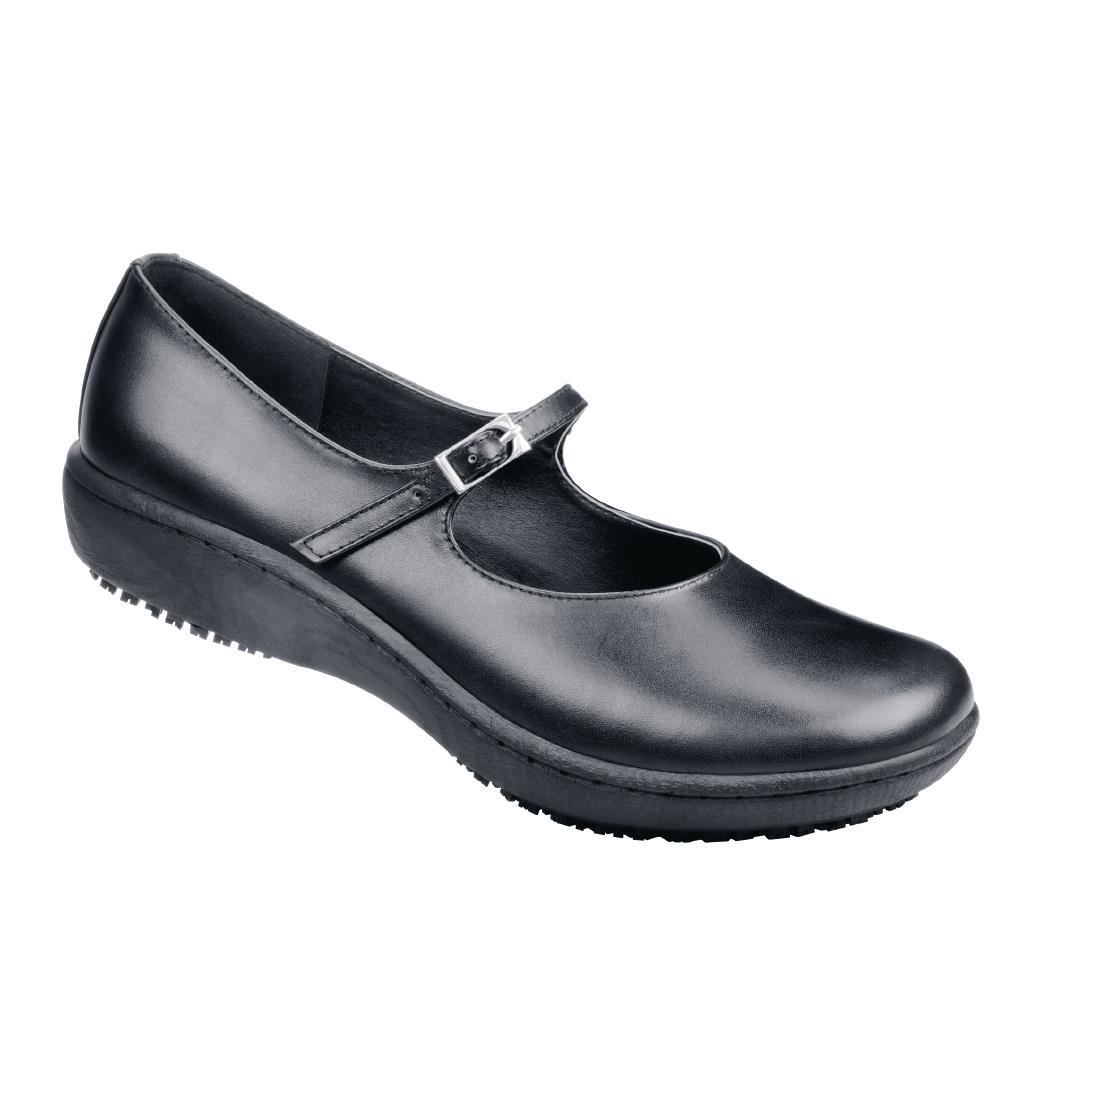 Shoes for Crews Womens Mary Jane Slip On Dress Shoe Size 42 - BB602-42  - 1